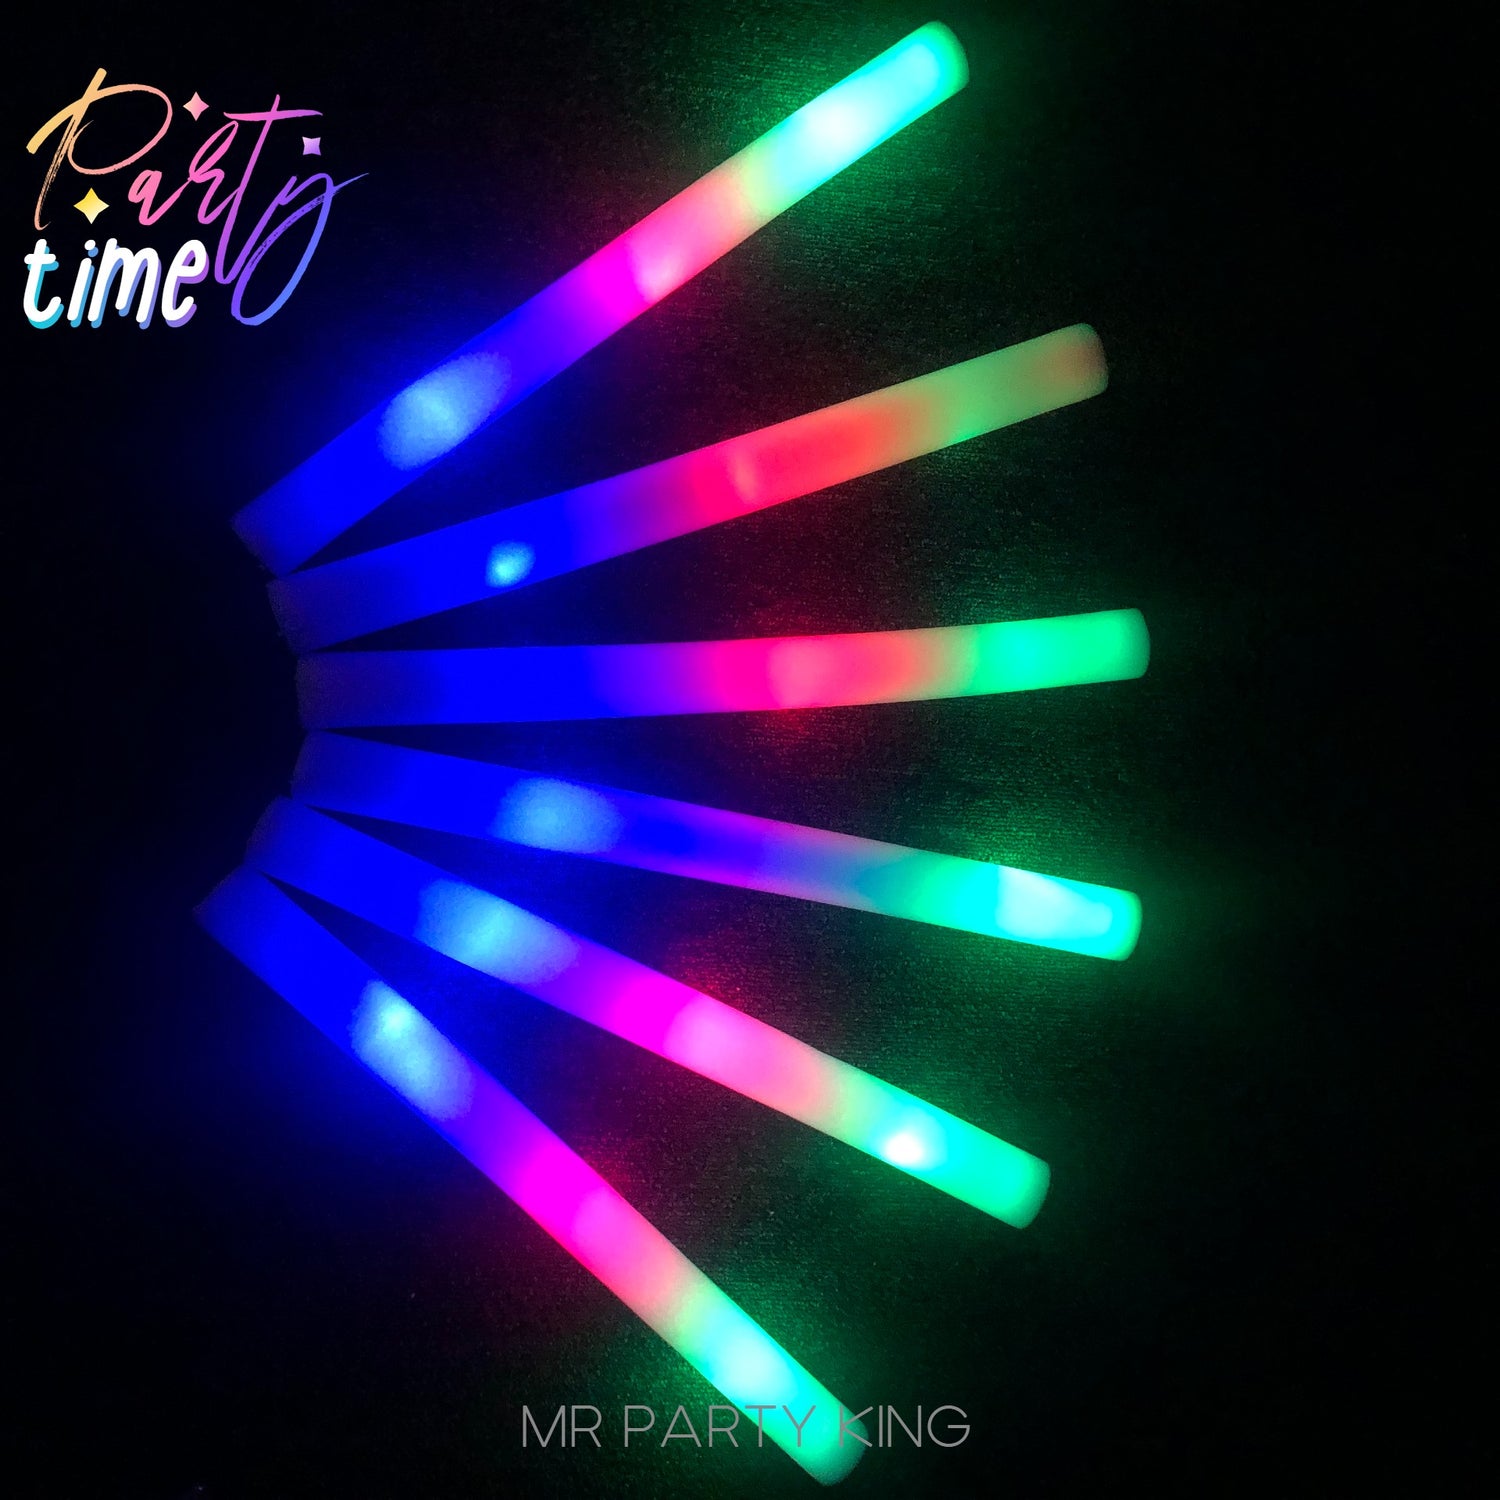 Mr Party King 20 LED Party Foam Light Sticks Batons Wand for Wedding,  Parties, Birthdays, Guests, Party, DJ, Concerts, Events, Promotions Bulk  Party